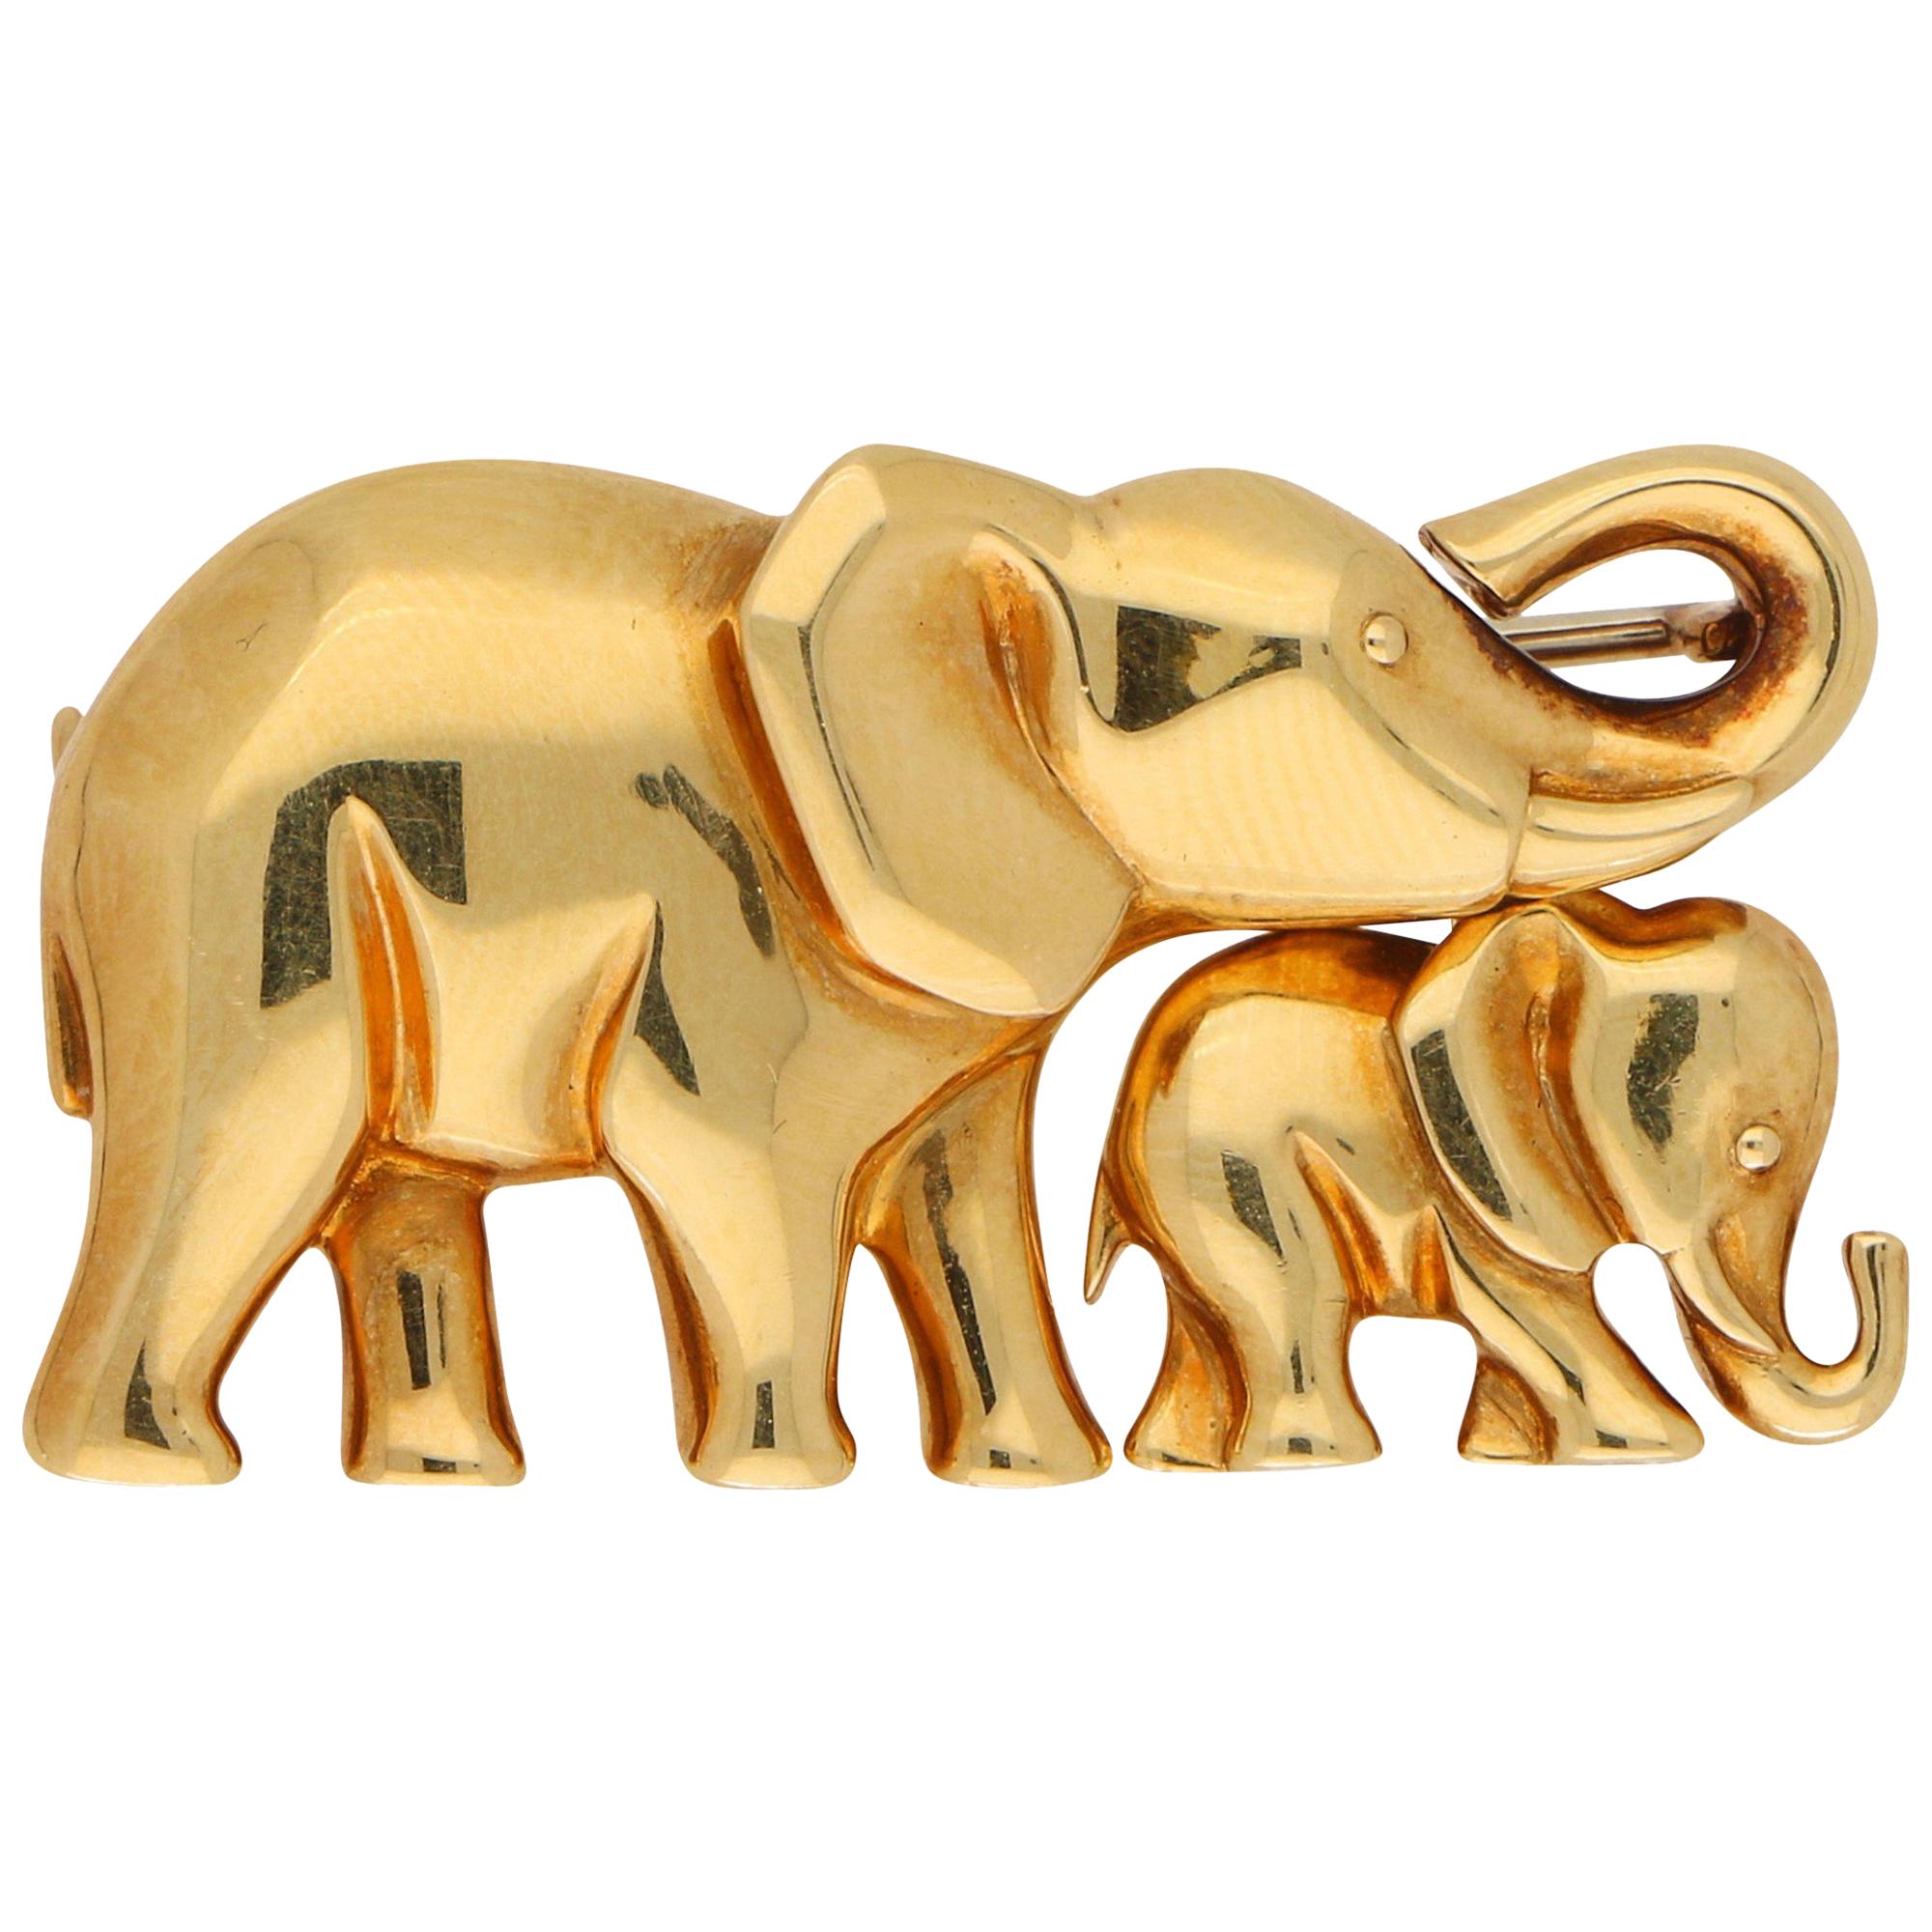 Cartier Elephant and Calf Brooch / Necklace Pendant Set in 18k Yellow Gold